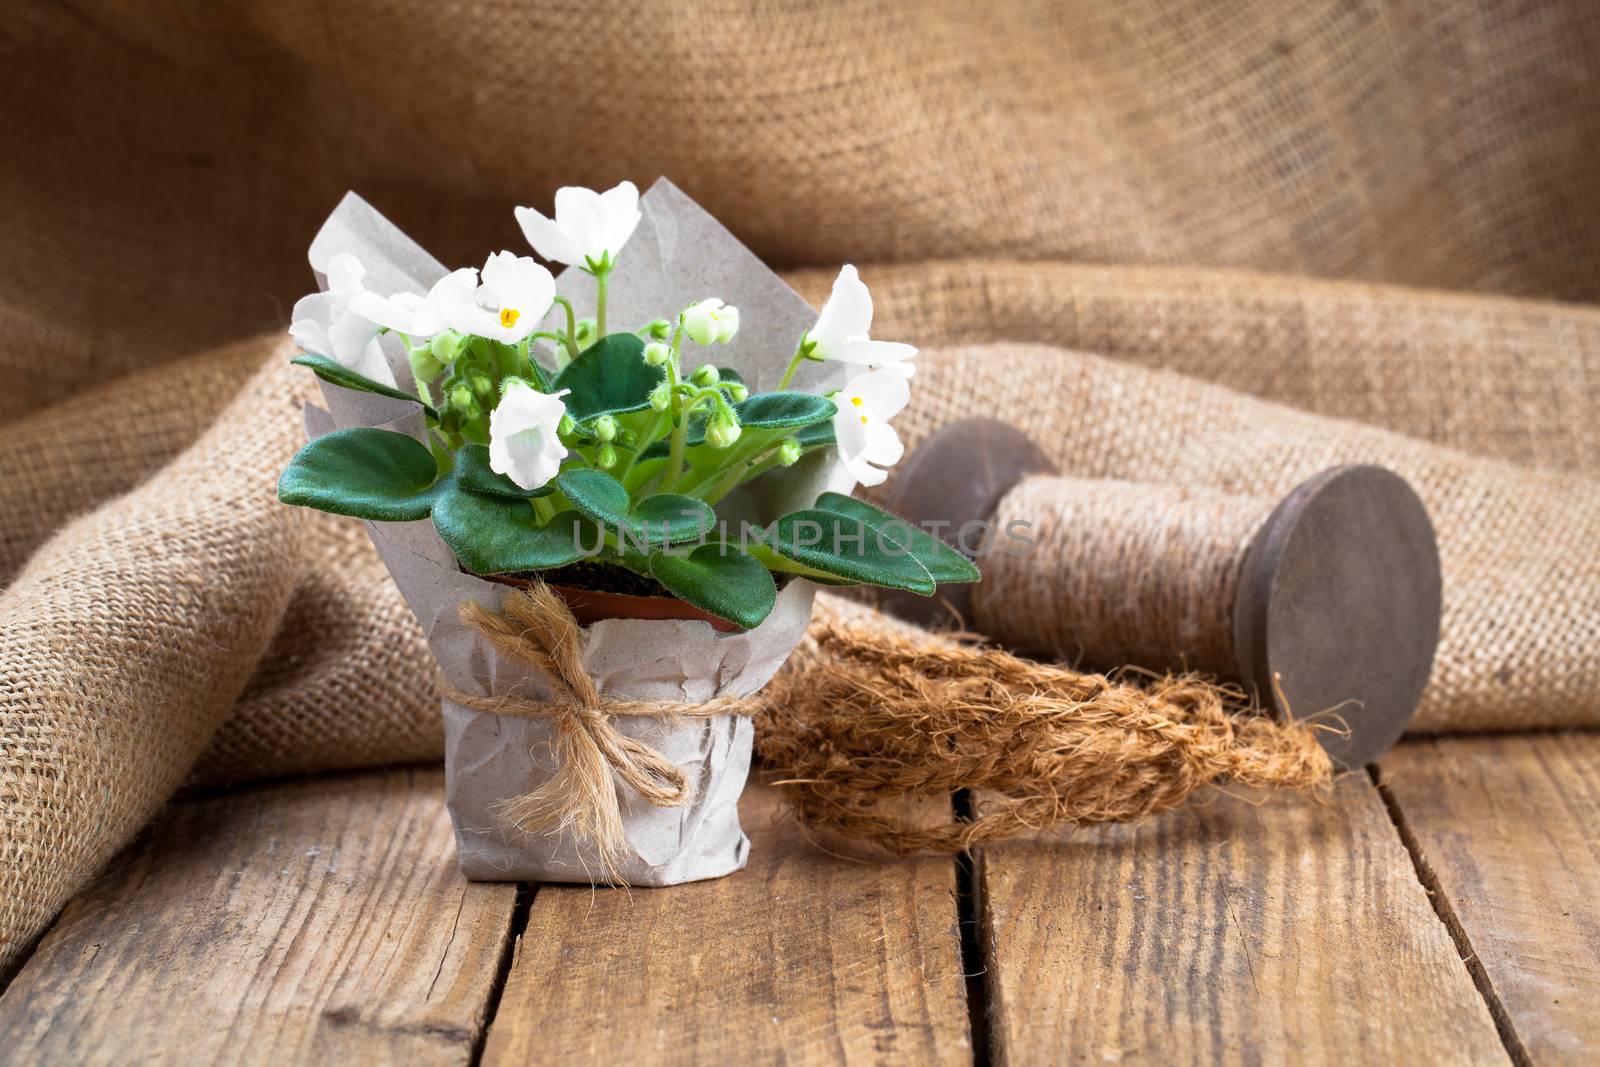 white Saintpaulias flowers in paper packaging, on sackcloth, wooden background